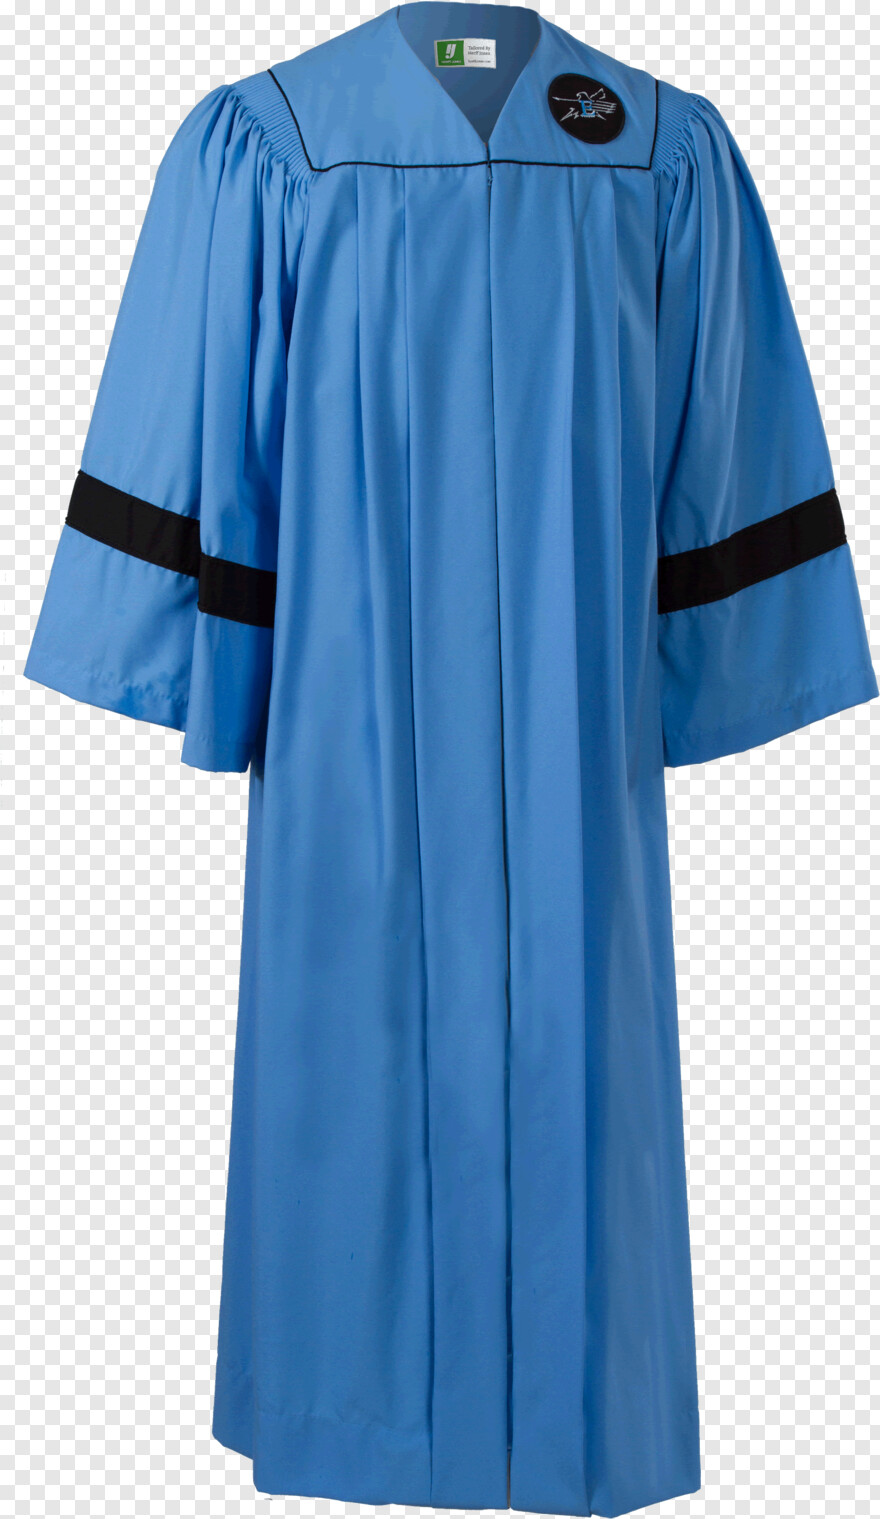 cap-and-gown # 1070848